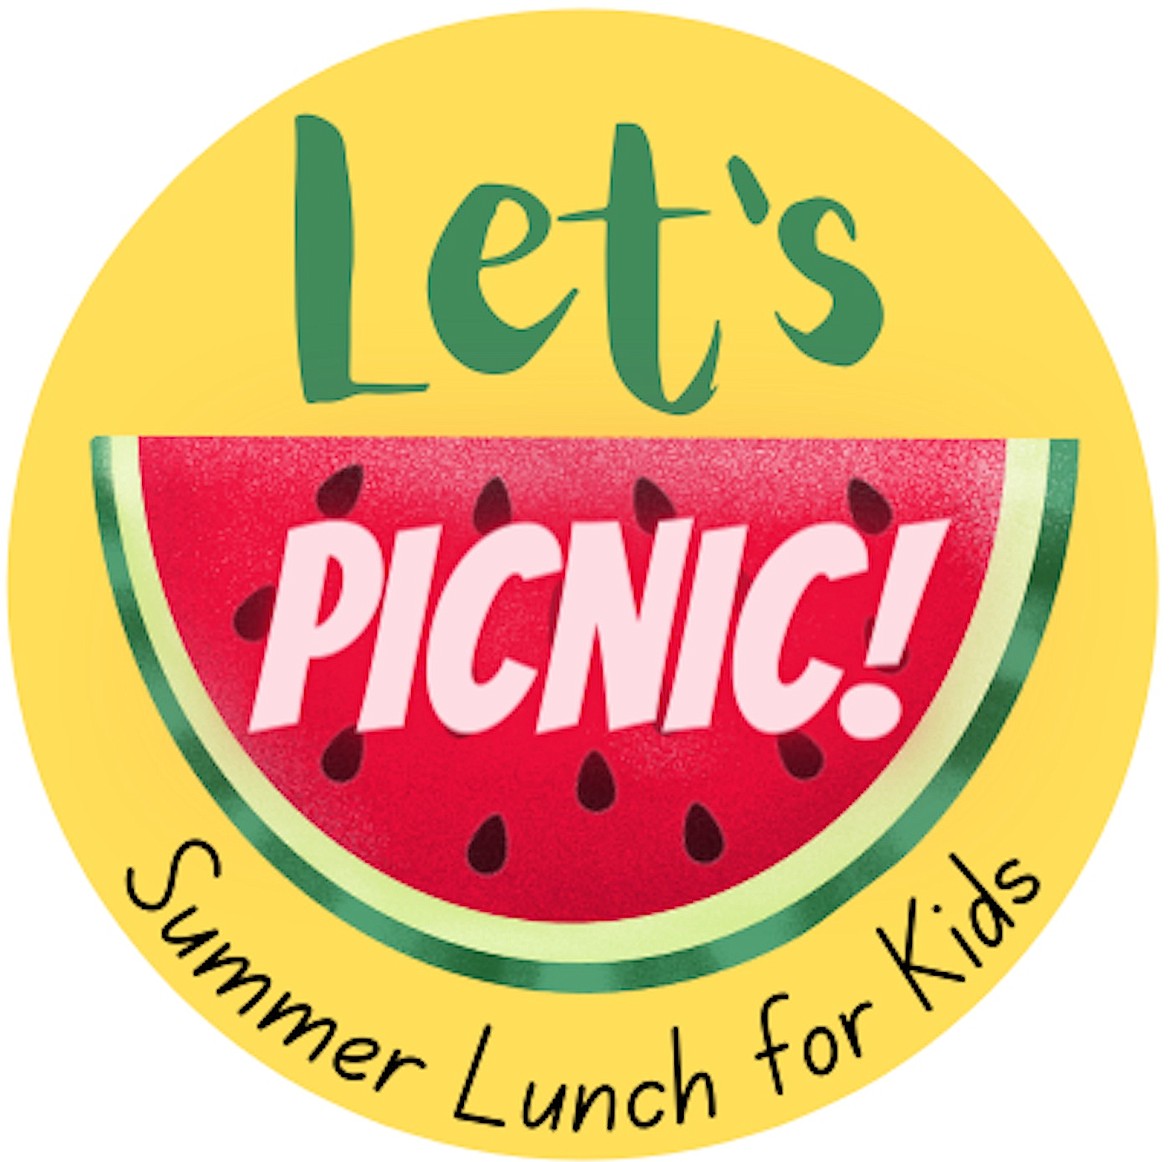 Donations are accepted in any amount to help the community's hungry kids this summer. The “Let’s Picnic!” partnership has set a goal of $85,000 to fund the project for the entire summer.